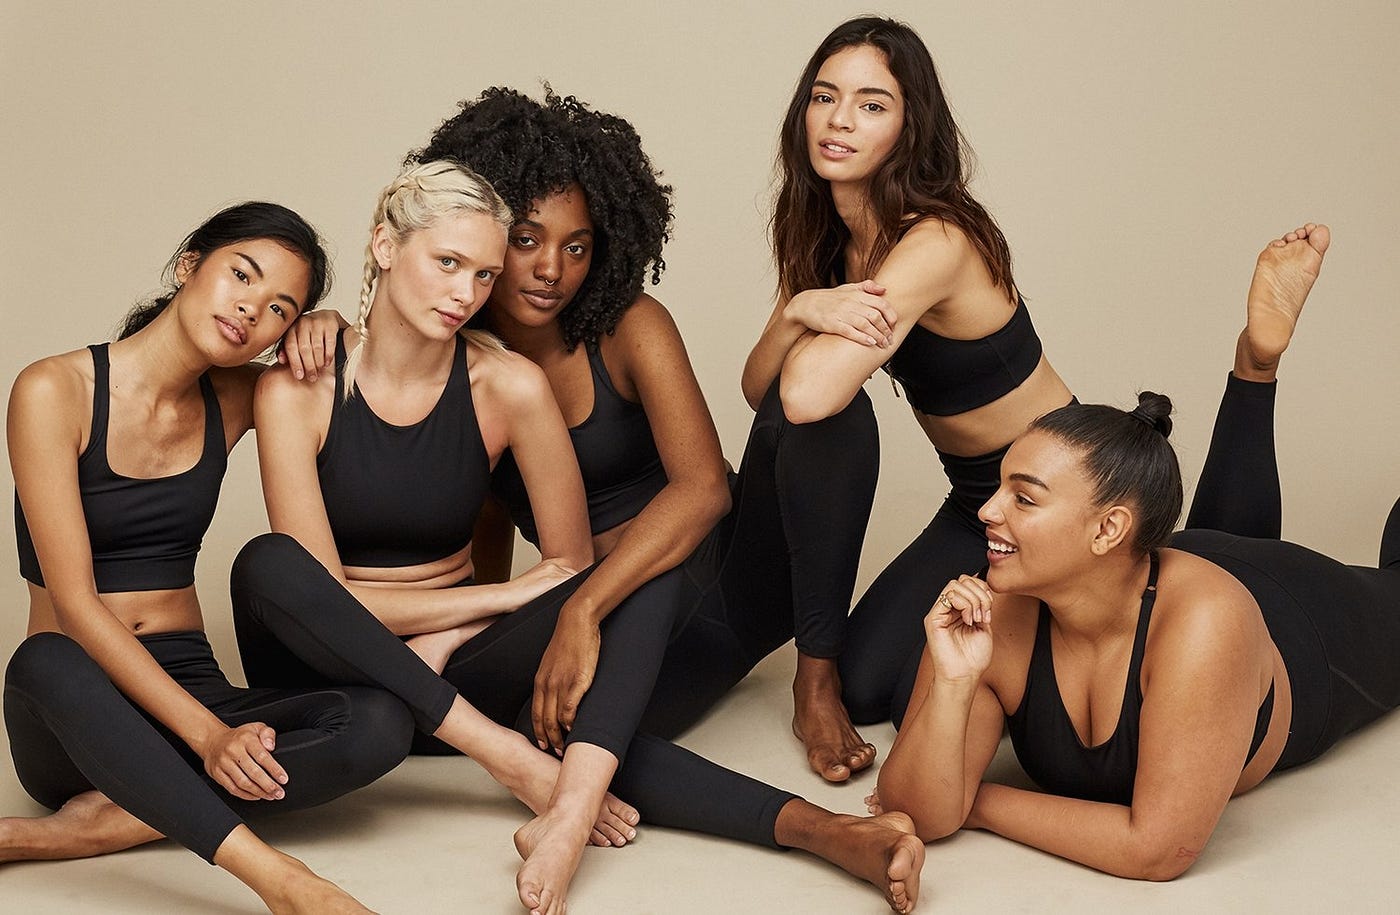 Athleisurewear trend: founders of activewear brand P.E. Nation on